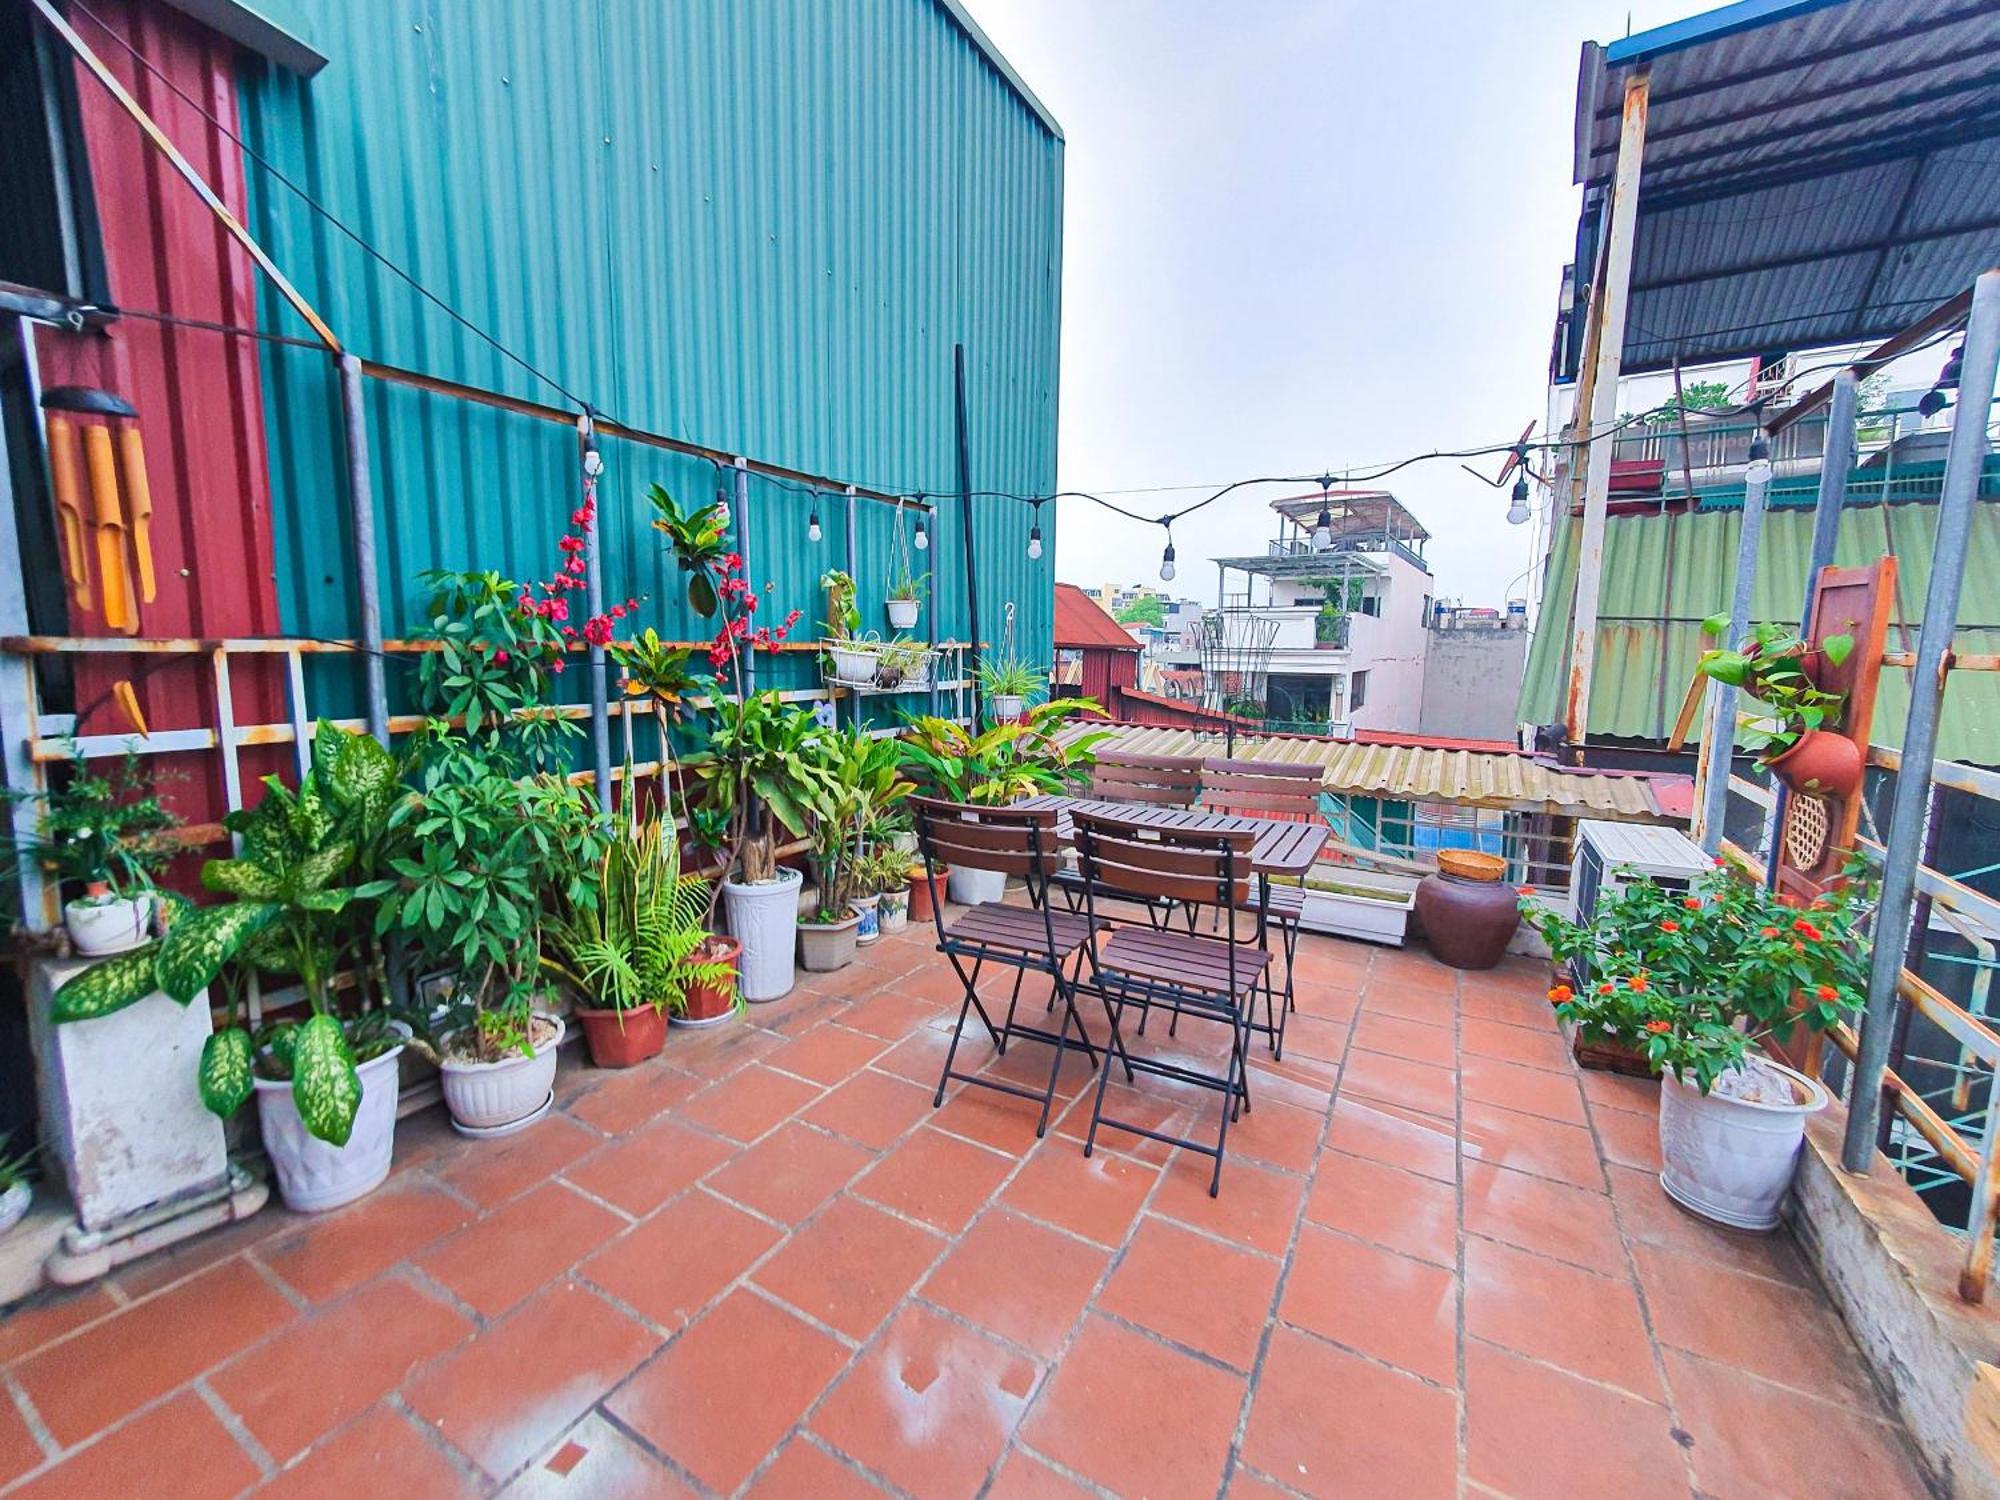 Top Location 3-4-5 Bedrooms House In Centre Of Ha Noi - Clean, Cozy And Private - The Tournesol Hanoi Exterior photo